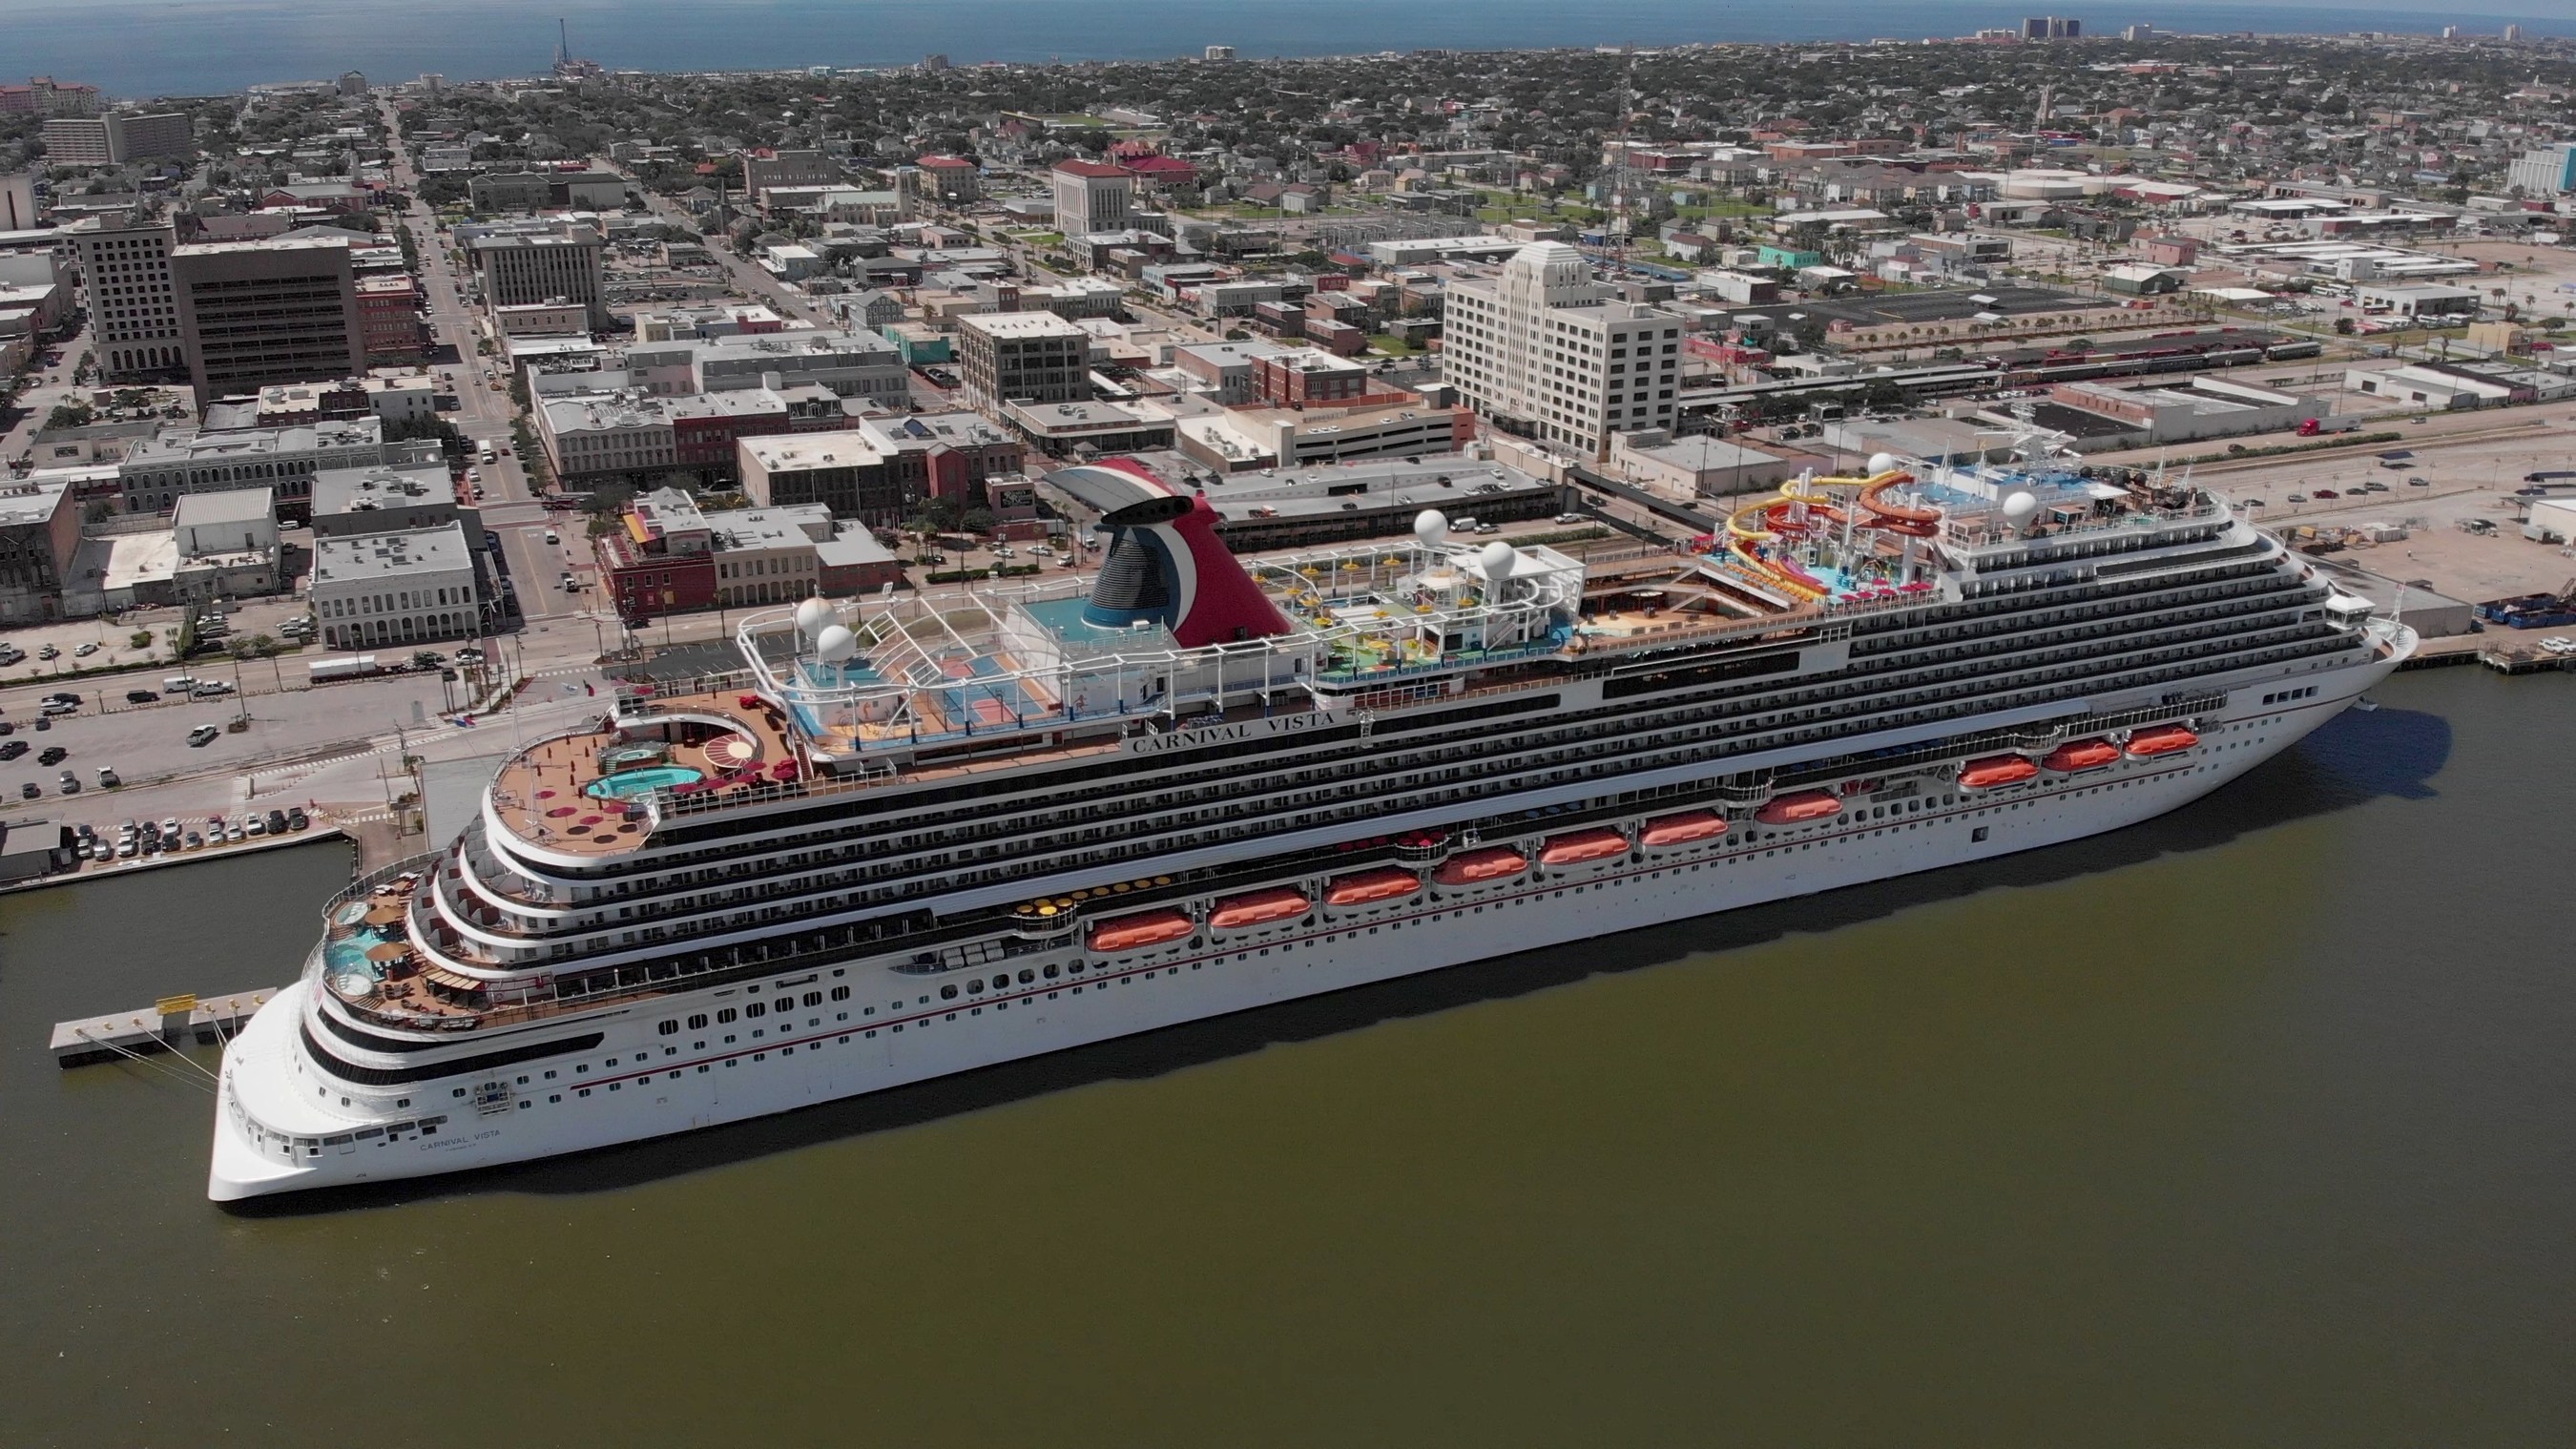 Carnival Cruise Line Kicks Off Its First Cruise From The U.S. With